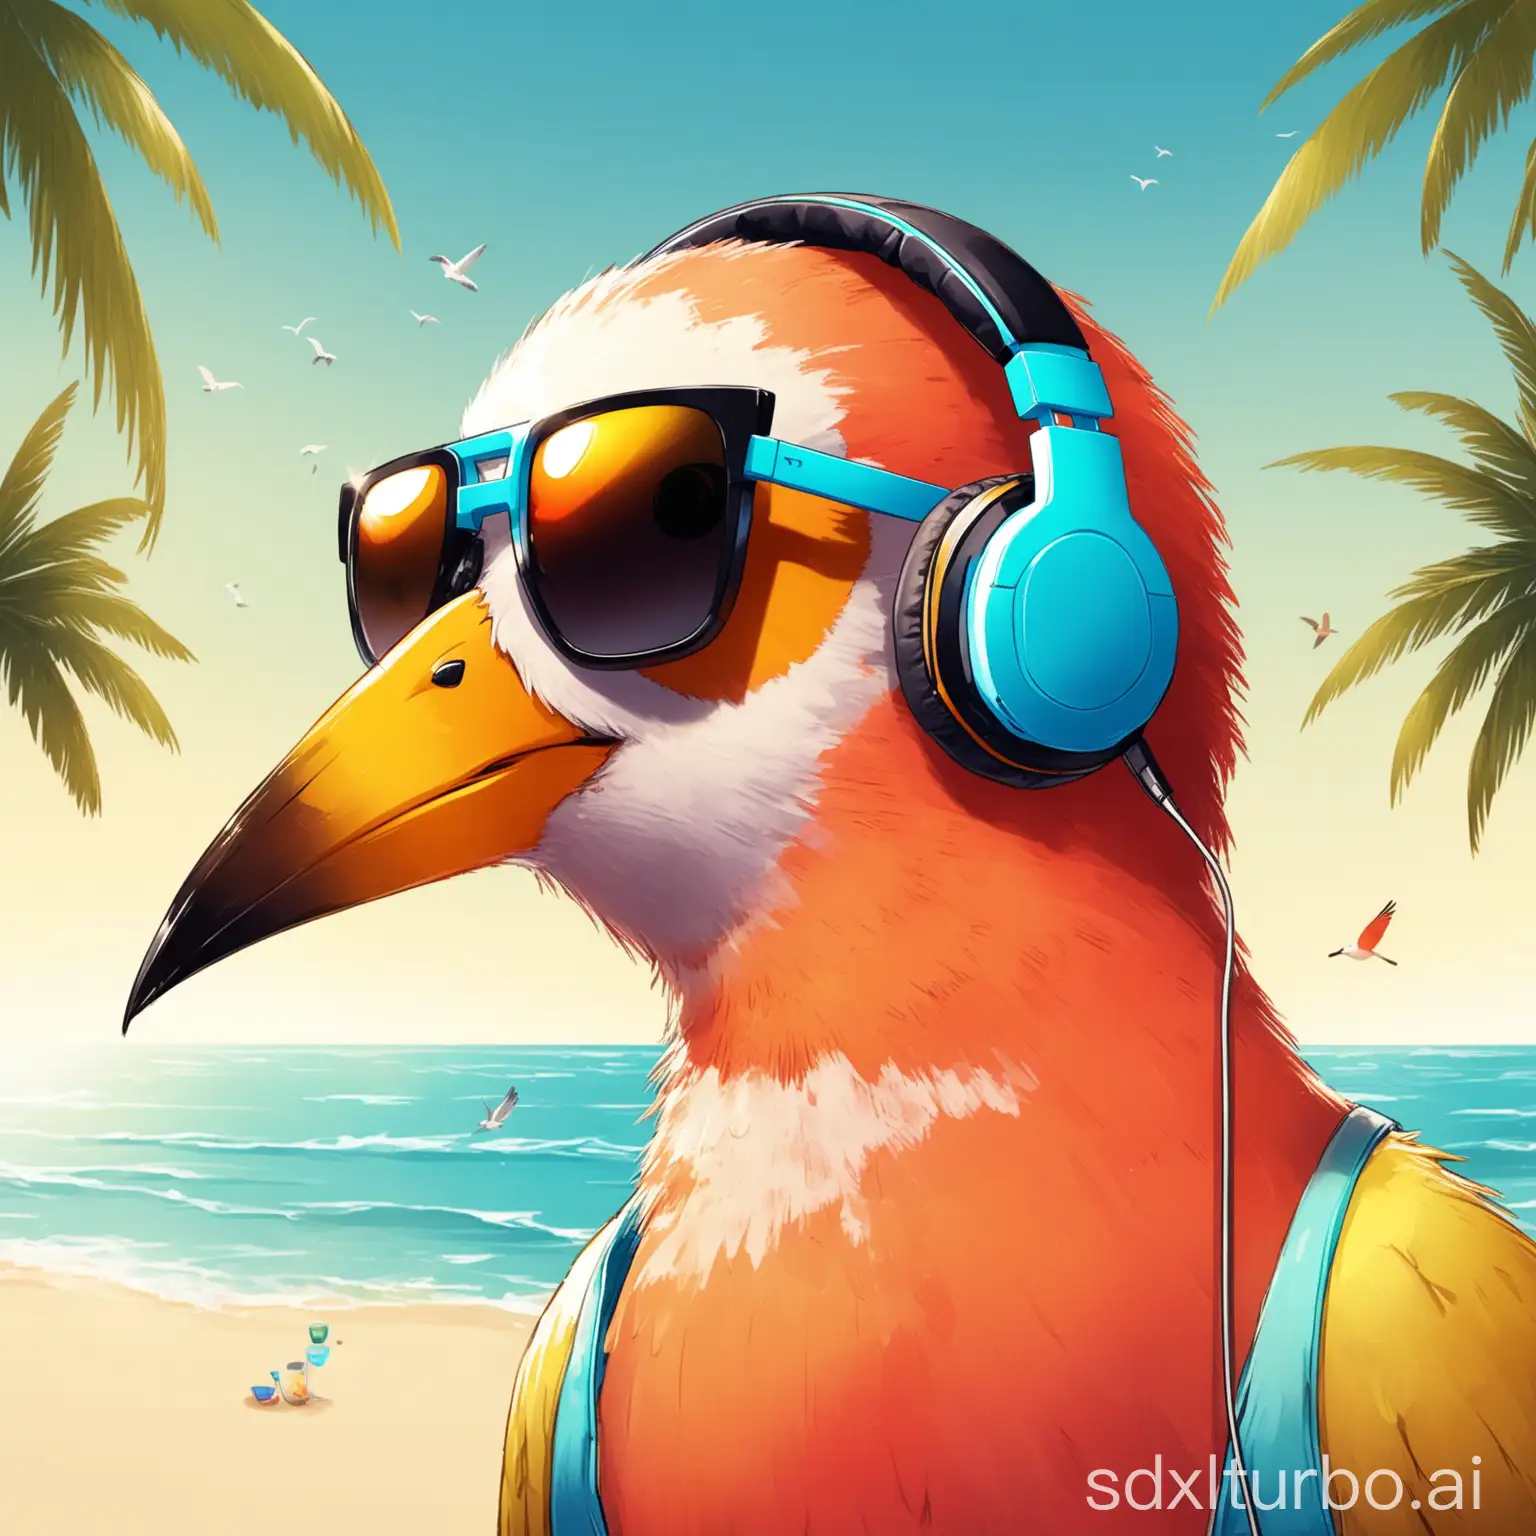 A profile pic of a cool beach bird with his headphones, sunglasses and partying